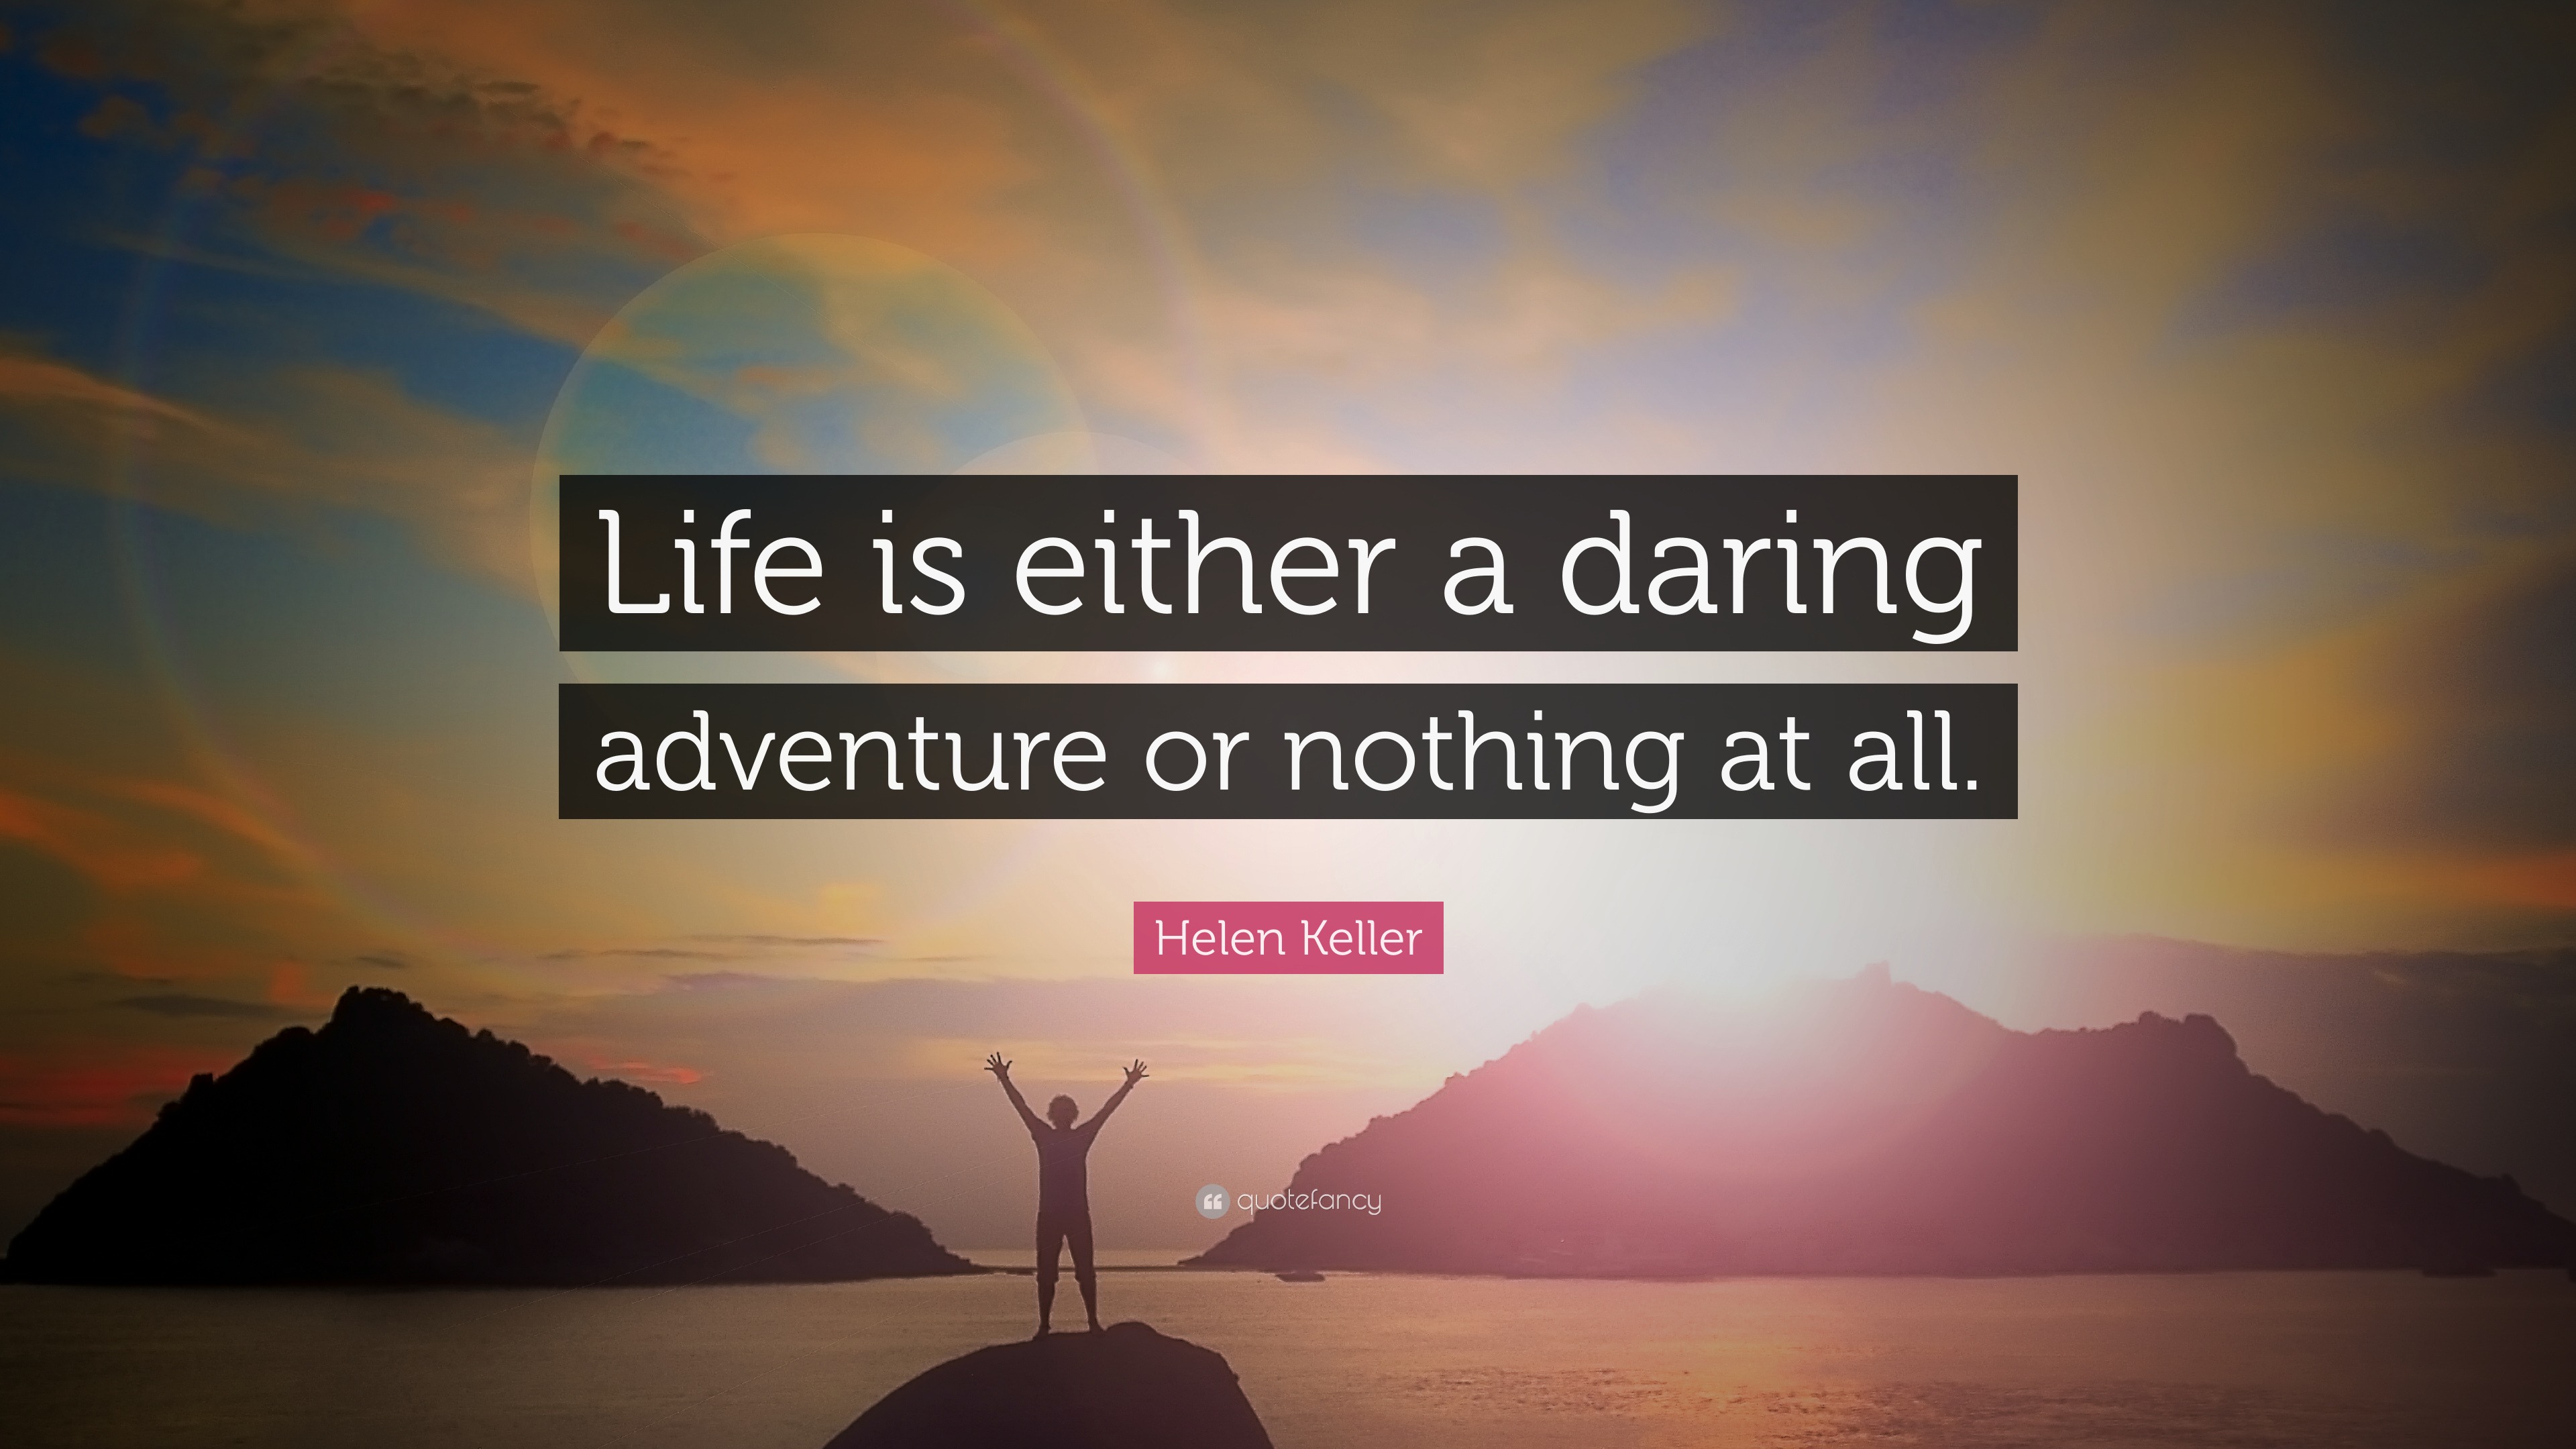 Helen Keller Quote: “Life is either a daring adventure or nothing at all.”